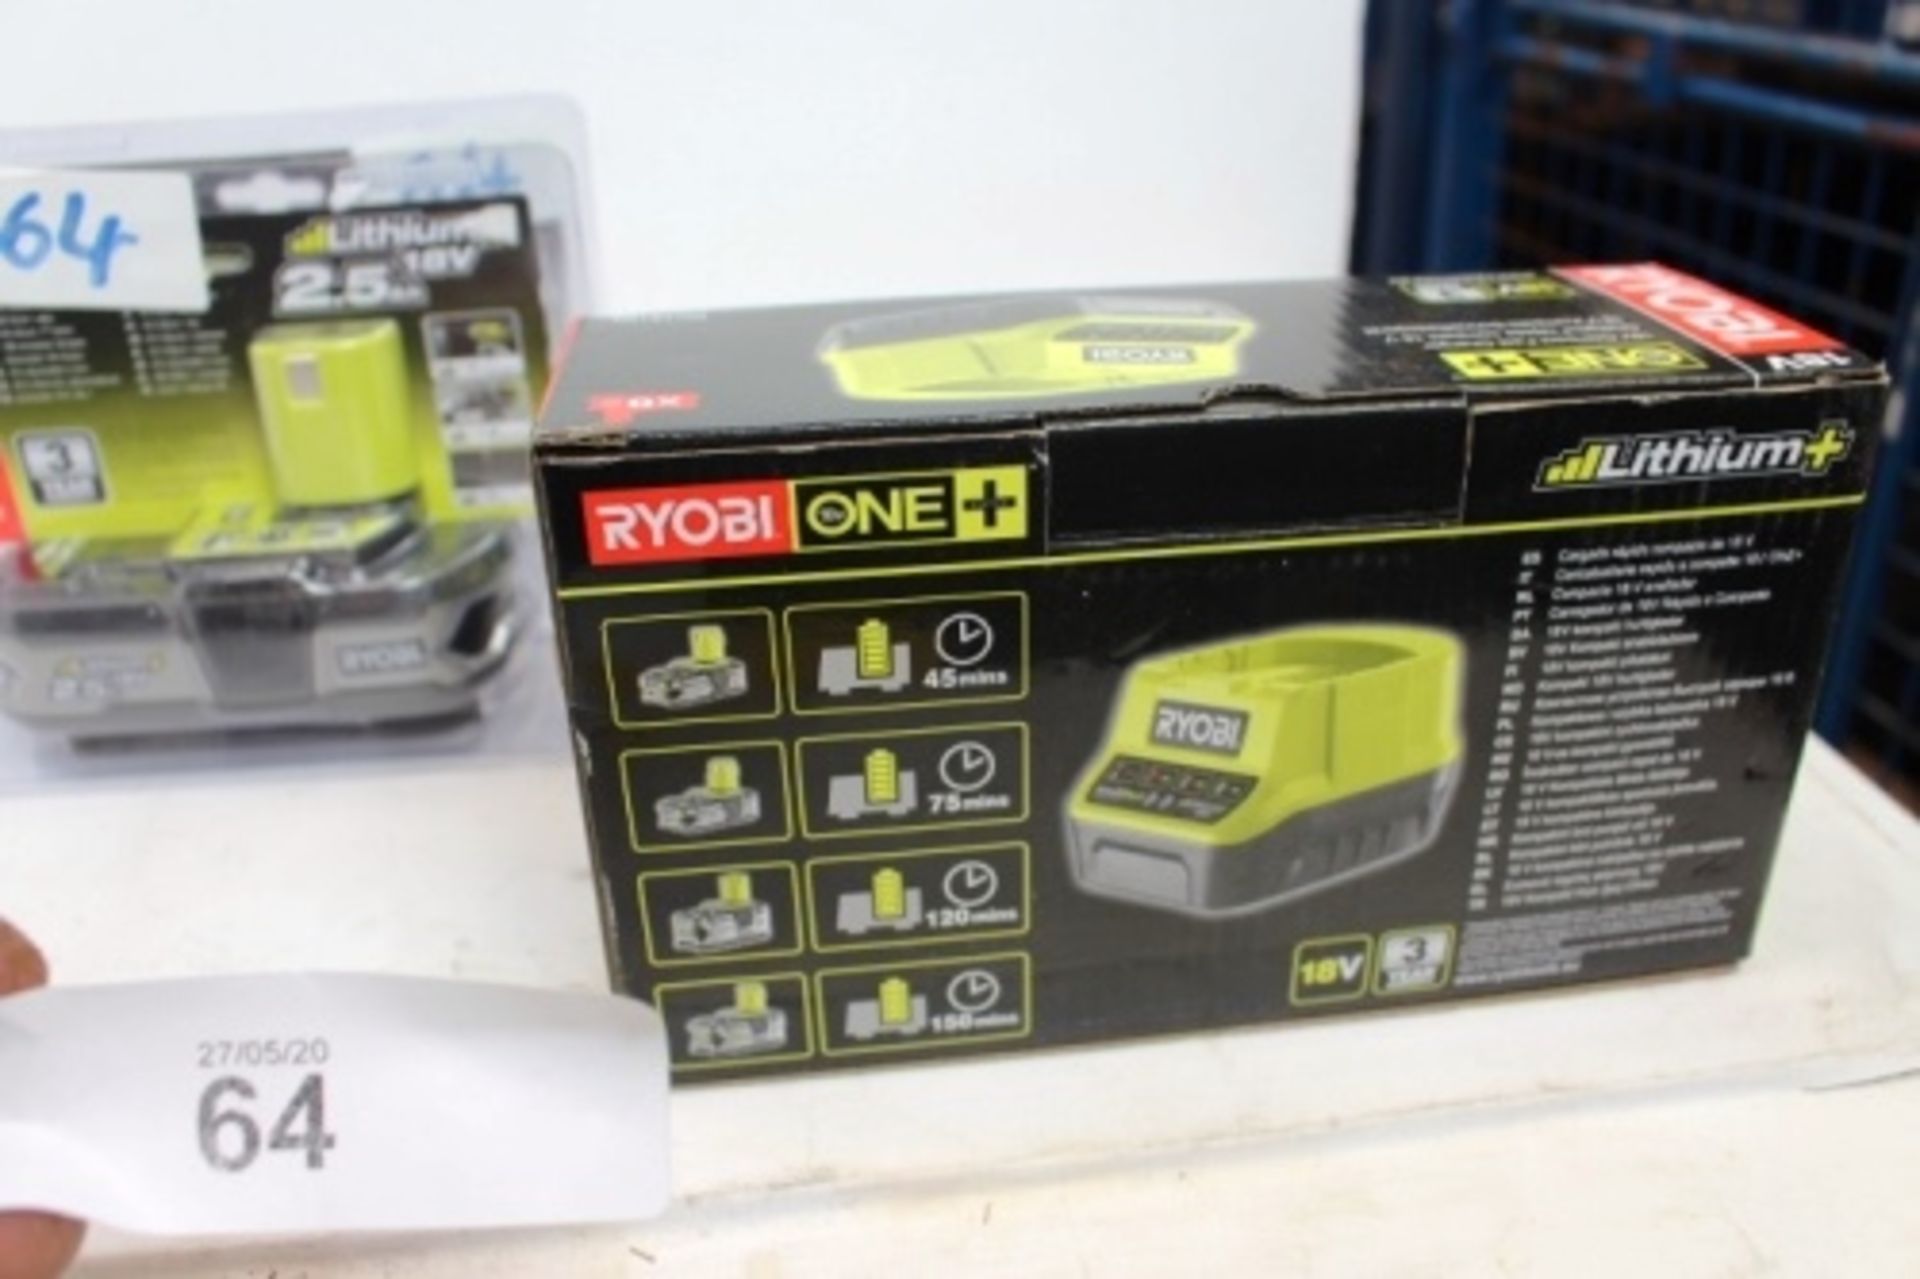 2 x Ryobi 18V, 2.5AH batteries, new, together with 1 x new and 1 x second-hand Ryobi battery - Image 2 of 2